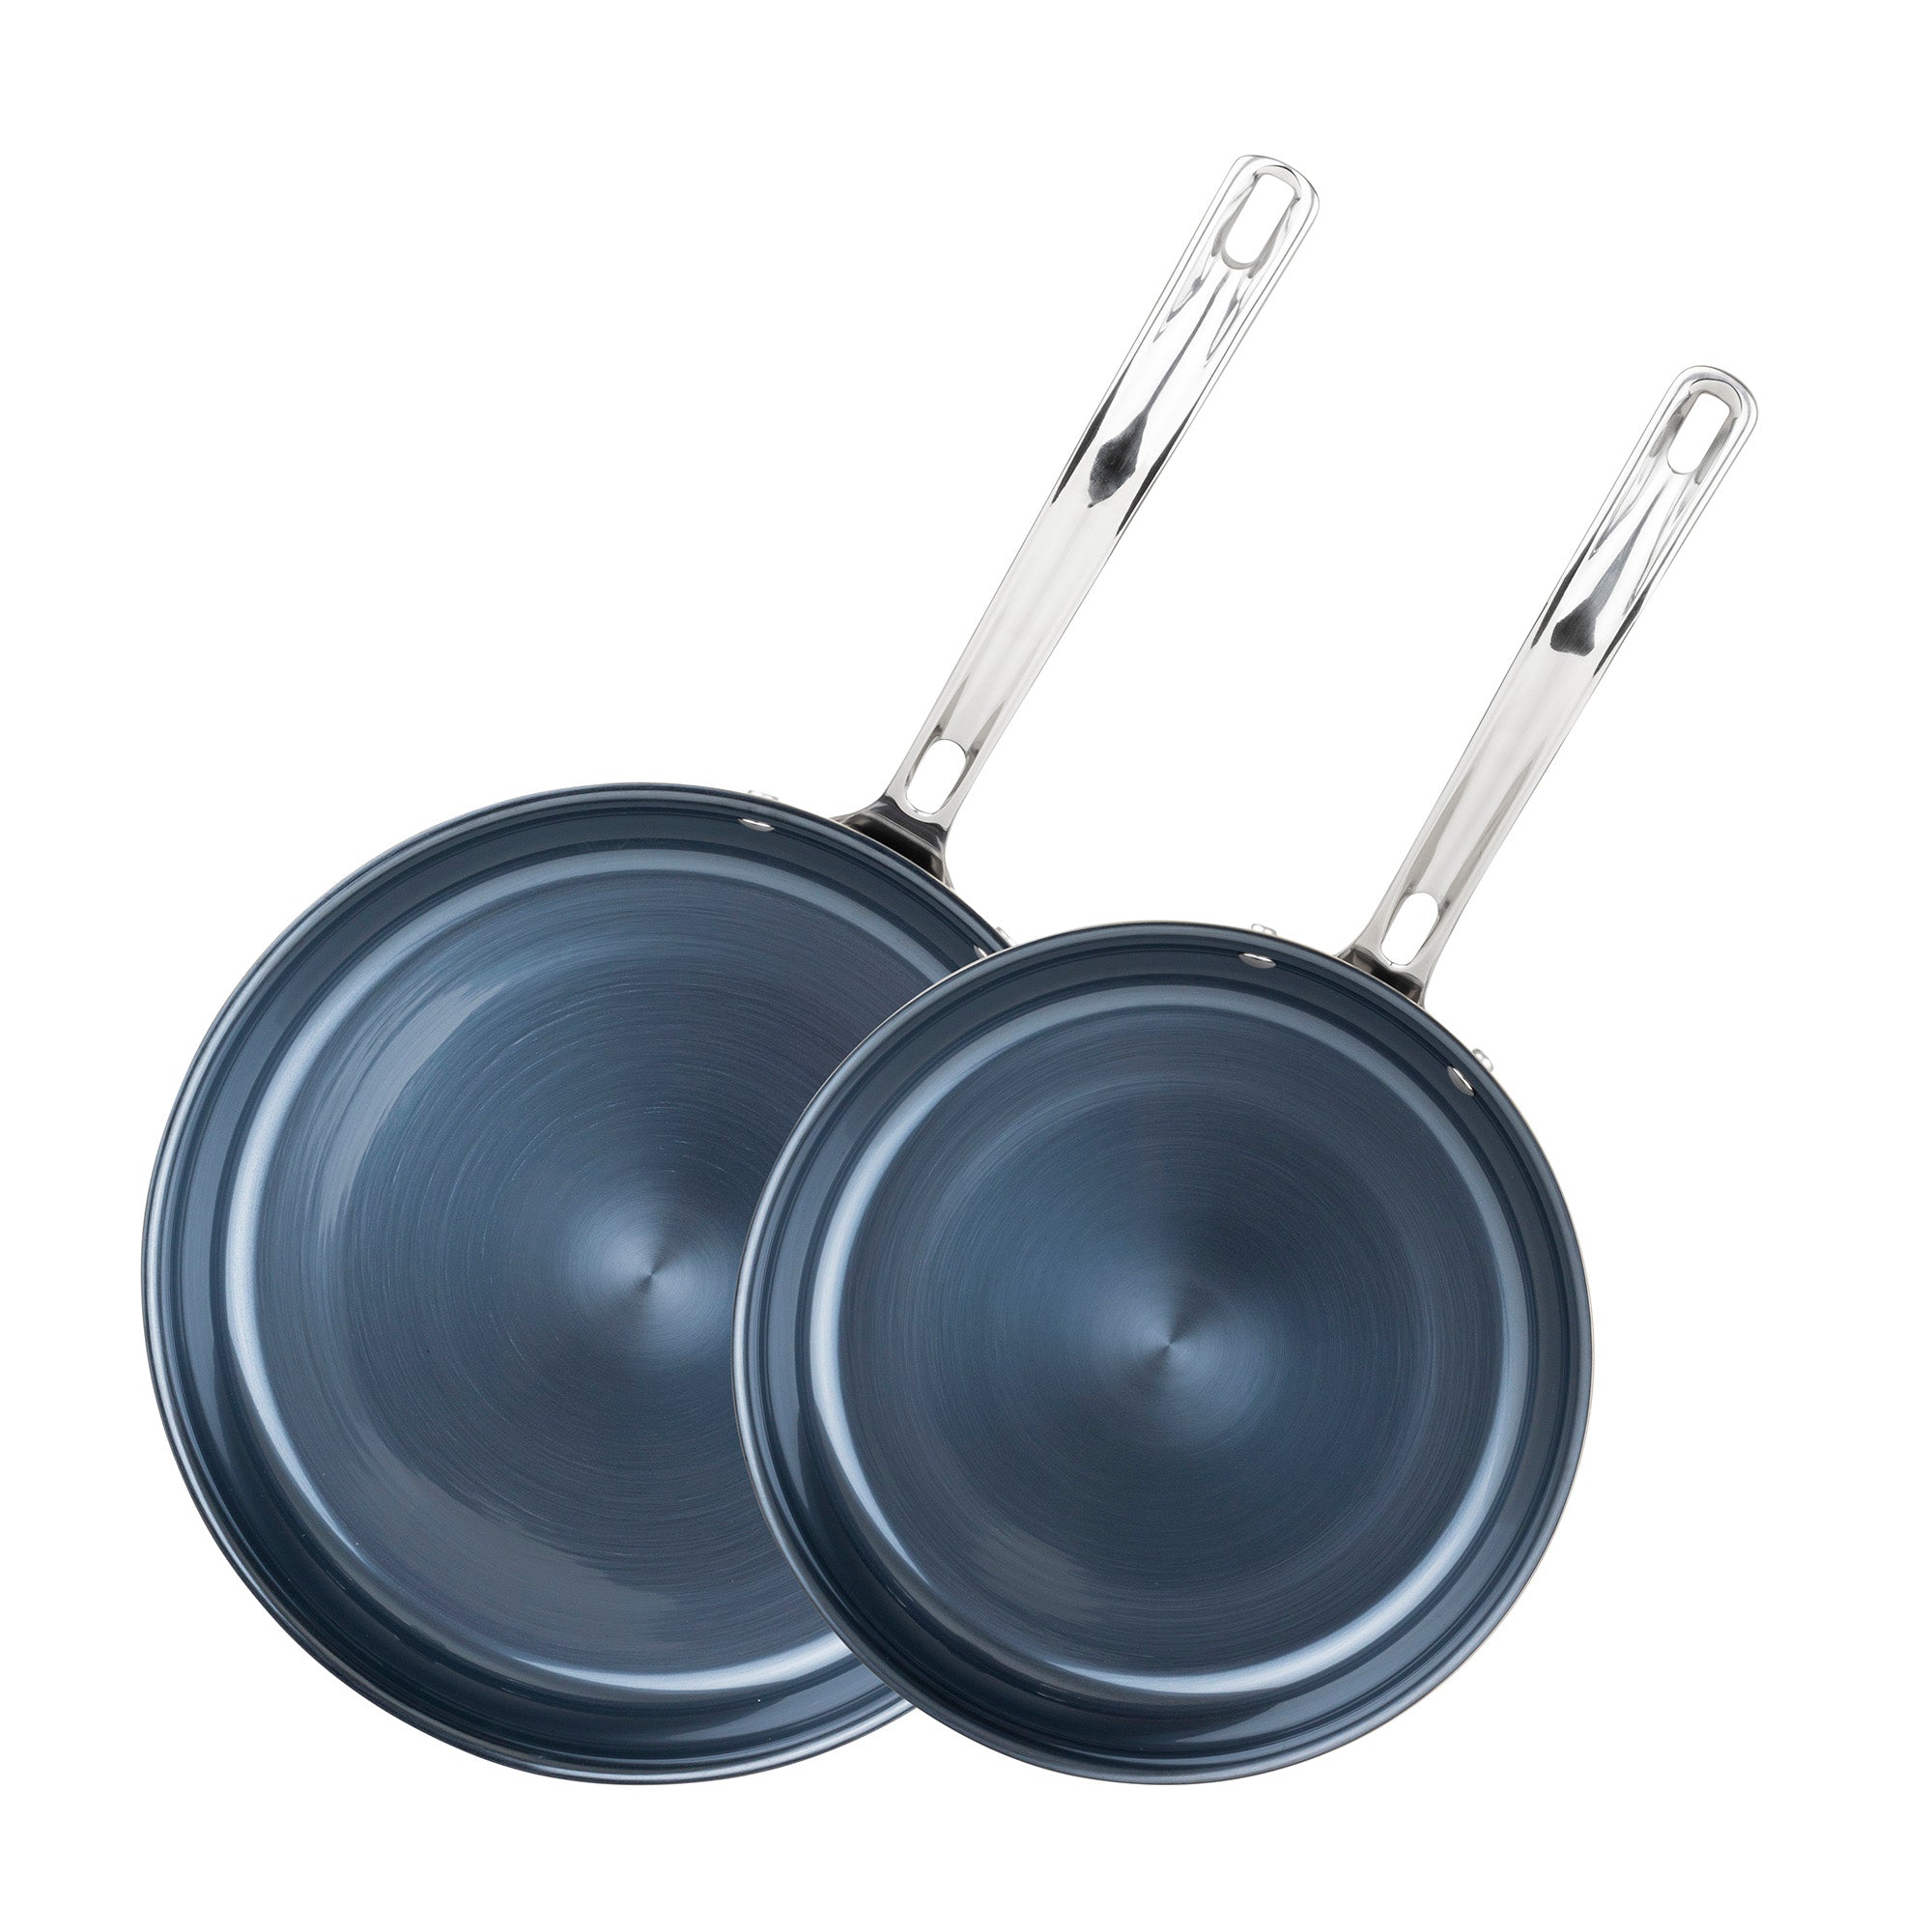 Blue Diamond Hard Anodized Toxin-Free Ceramic, Metal Utensil Safe Frying Pan Set, 10 inch and 12 inch